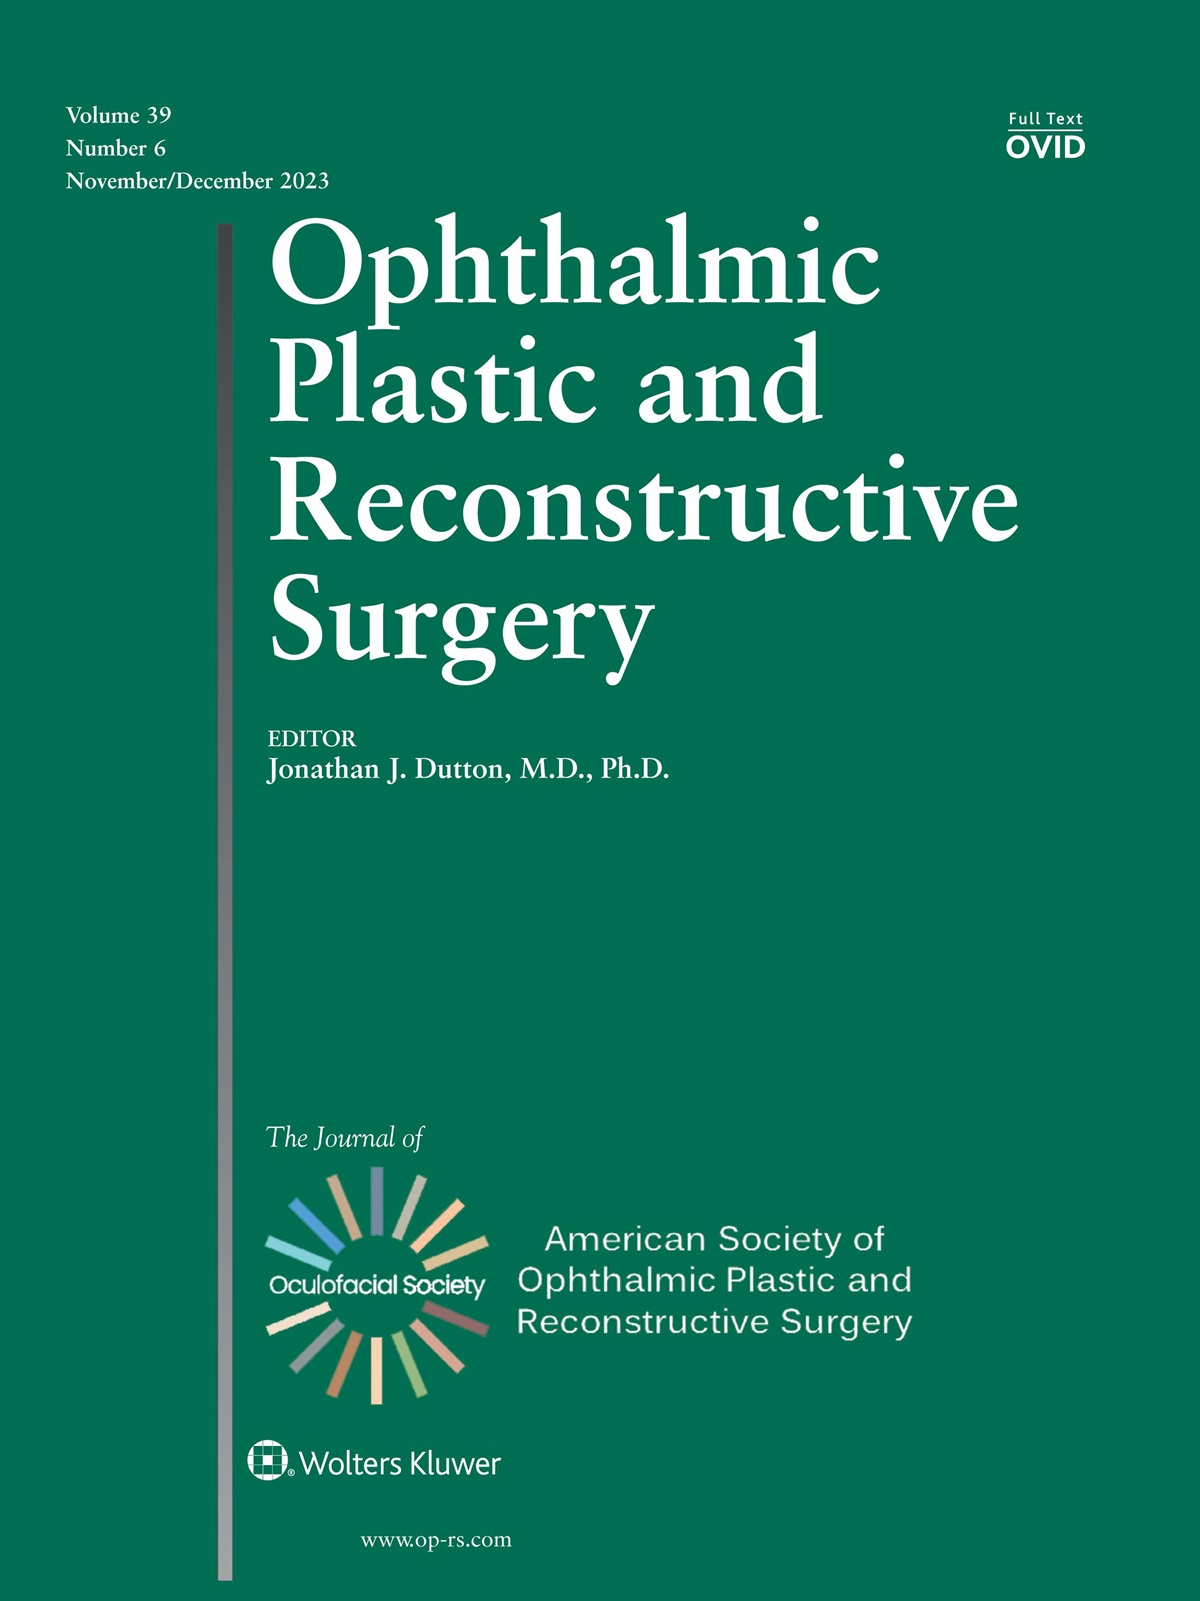 Reply Re: Pupil Abnormalities in Orbital Cavernomas: The Pupil Matters Both Preoperatively and Postoperatively